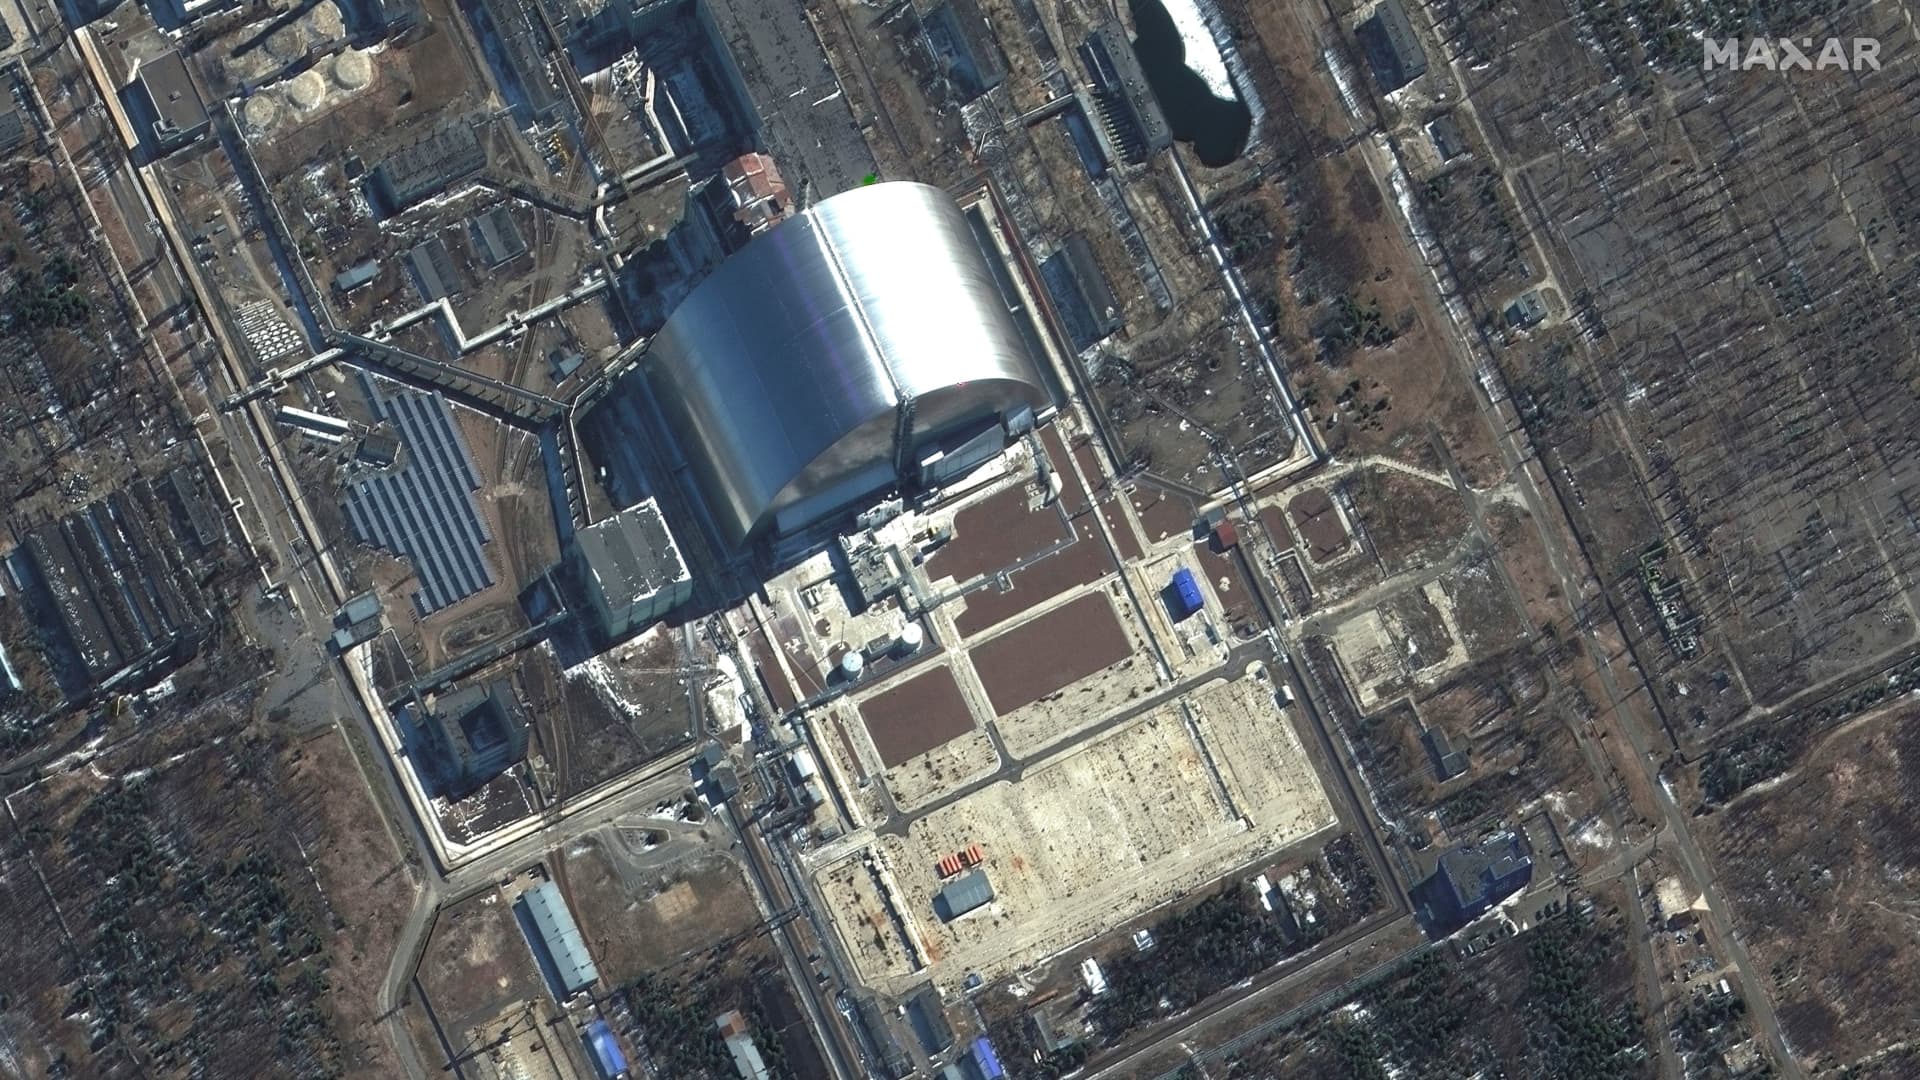 A satellite image shows a closer view of a sarcophagus at Chornobyl nuclear power plant, amid Russia's invasion of Ukraine, Ukraine, March 10, 2022.